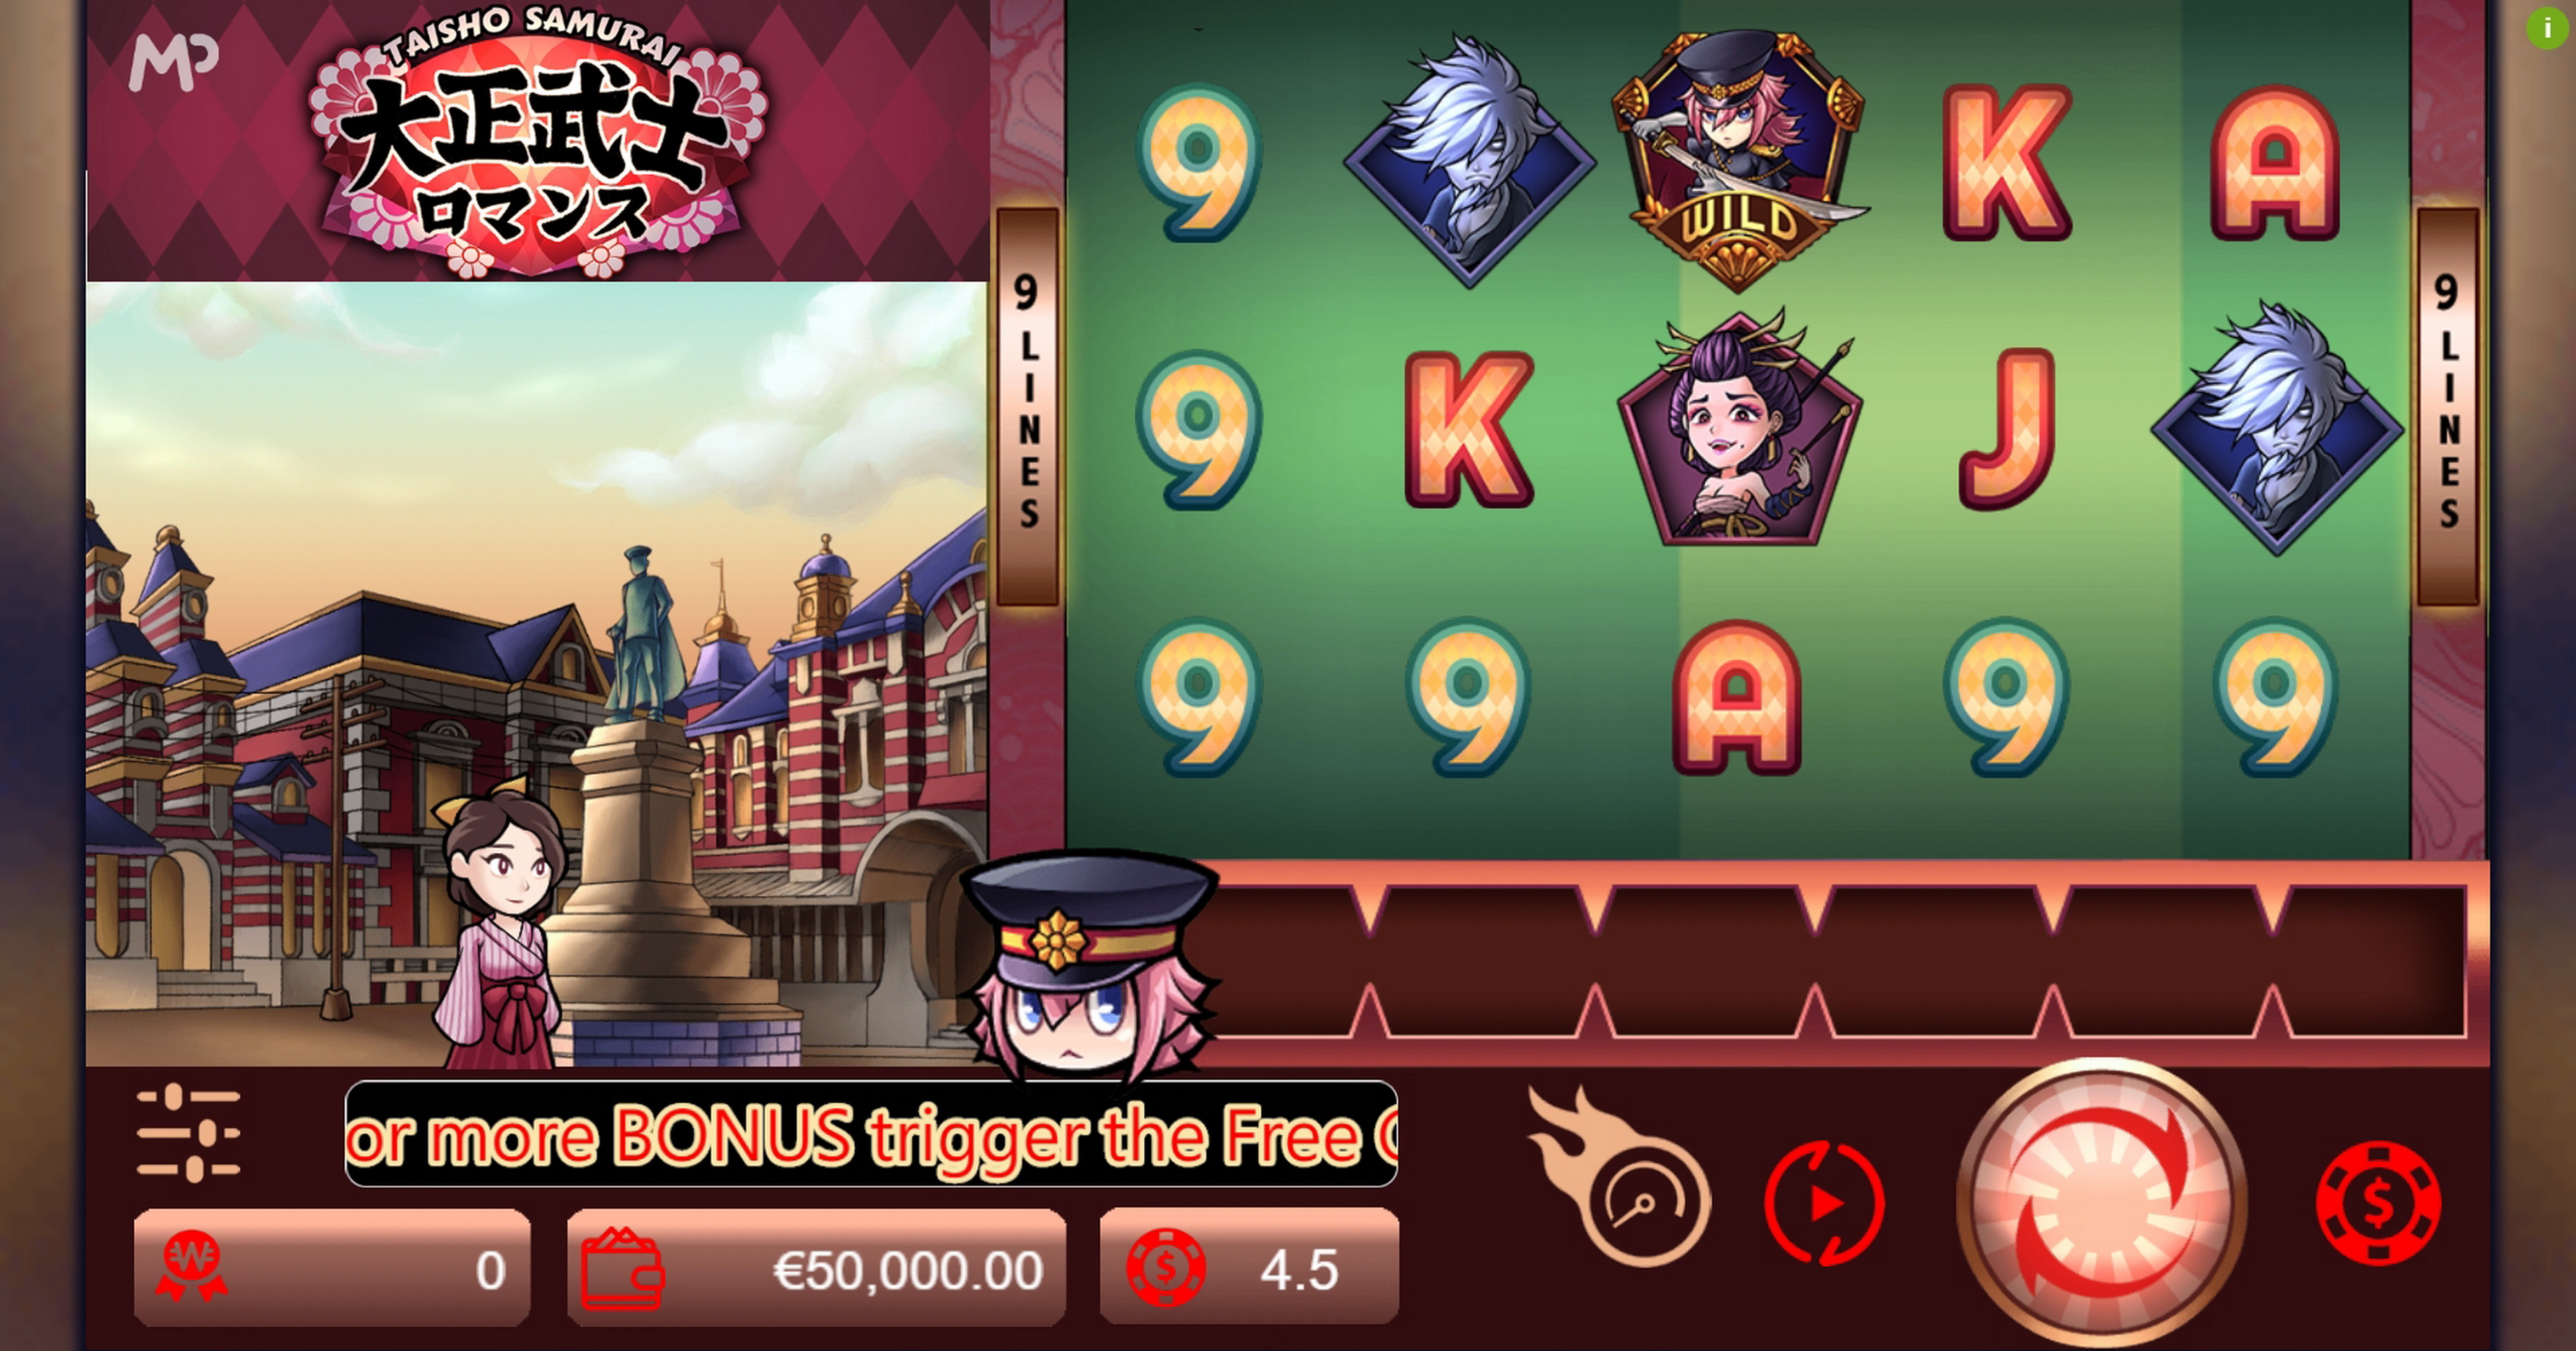 Reels in Taisho Samurai Slot Game by Manna Play